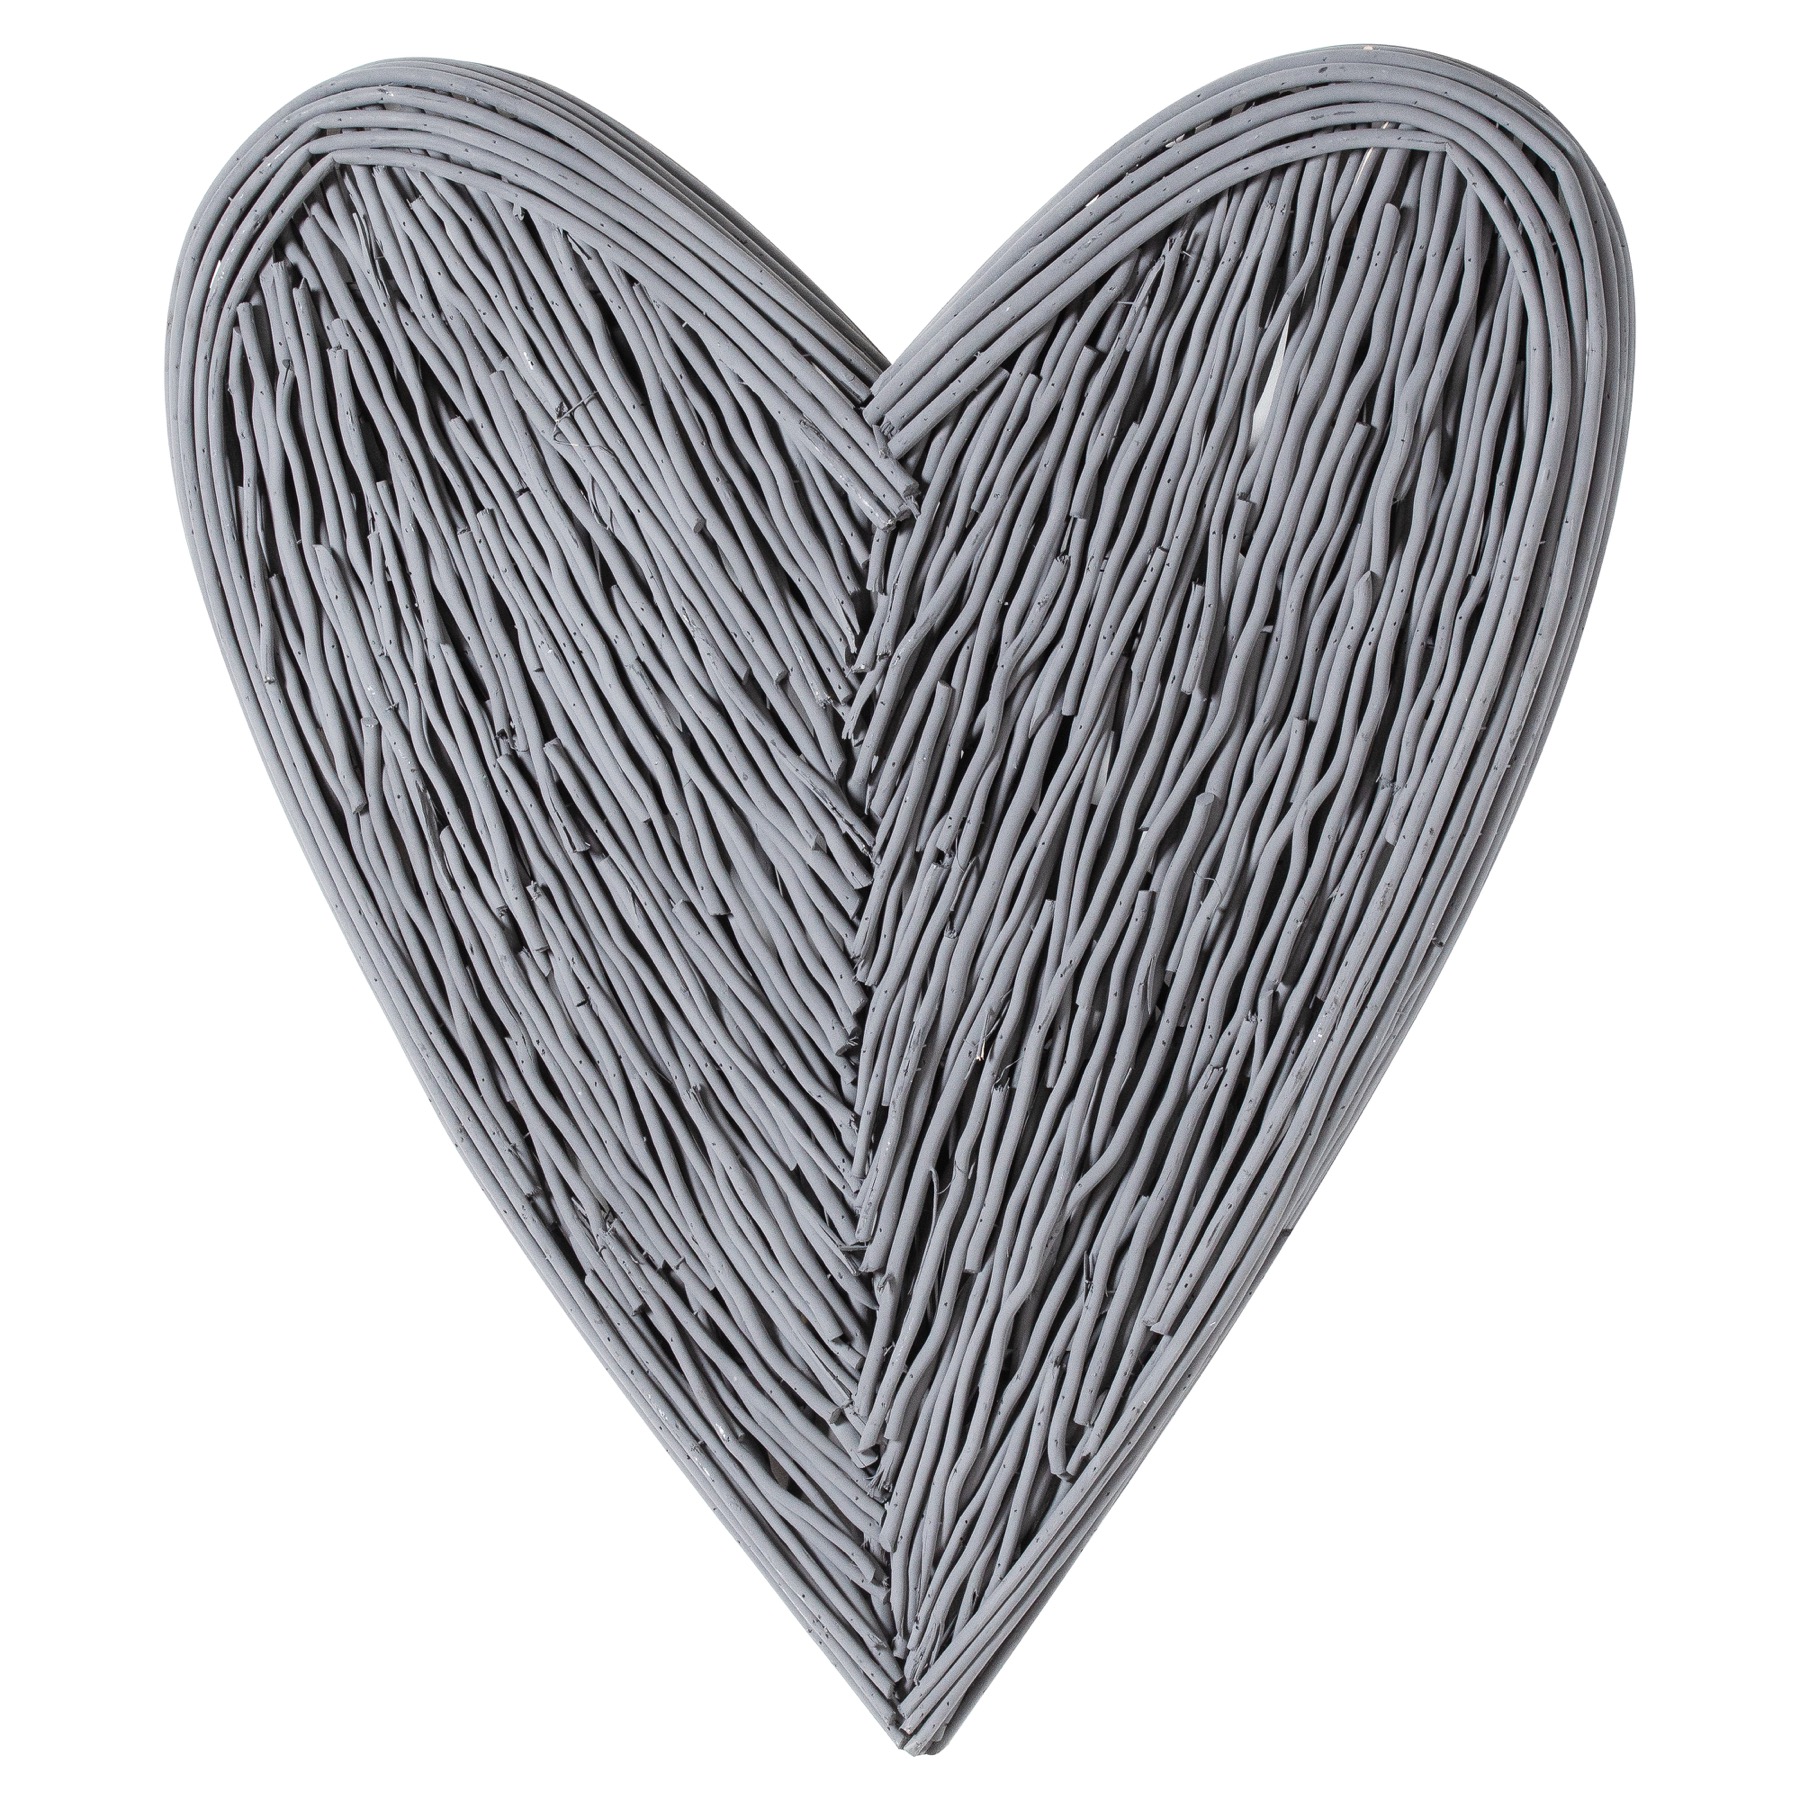 Large Grey Willow Branch Heart - Image 1